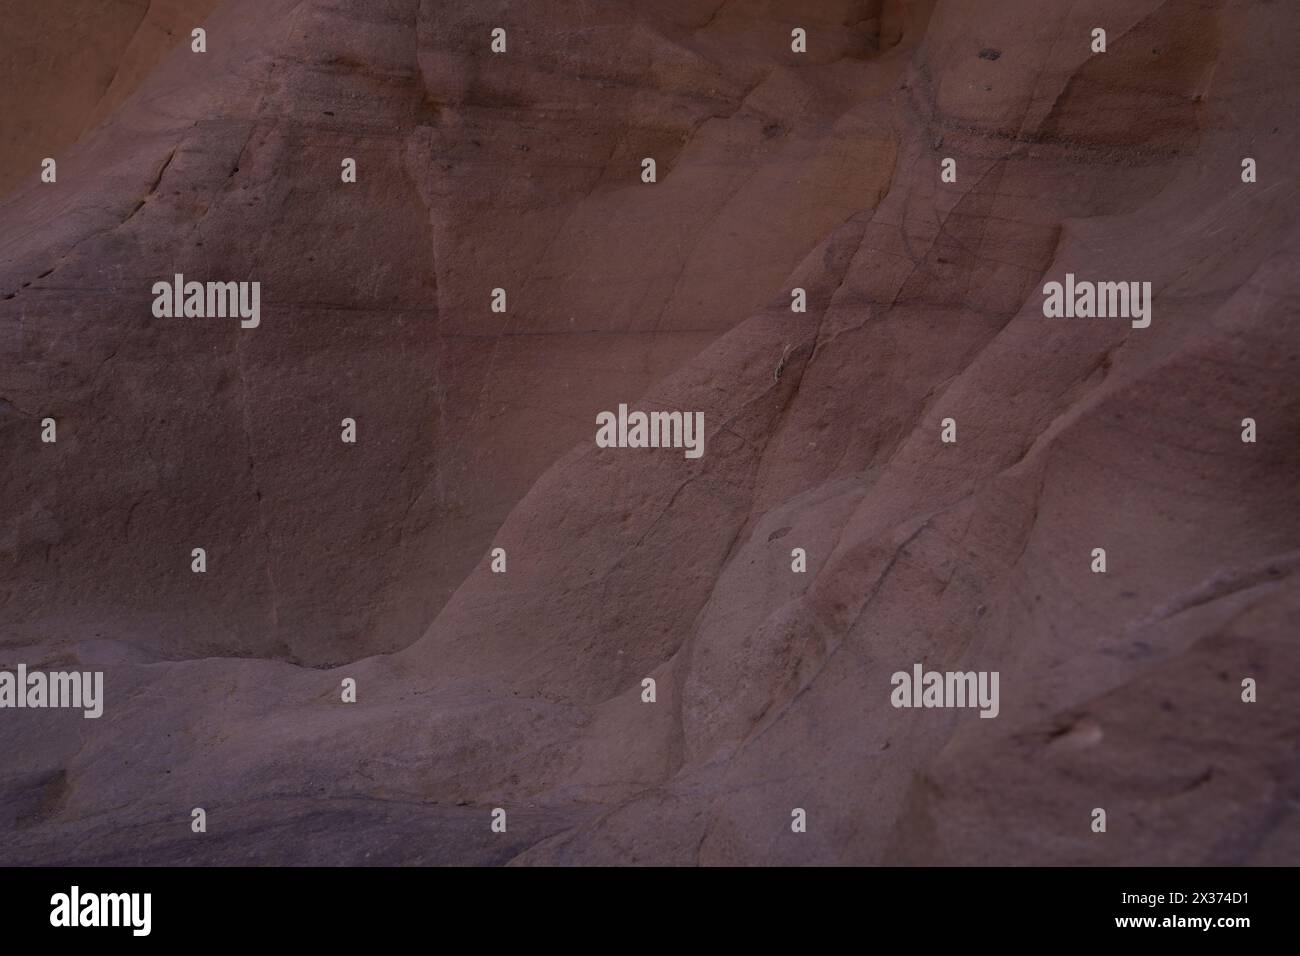 Closeup of rocks in Red Canyon, Geological nature park, near Eilat, Israel Stock Photo